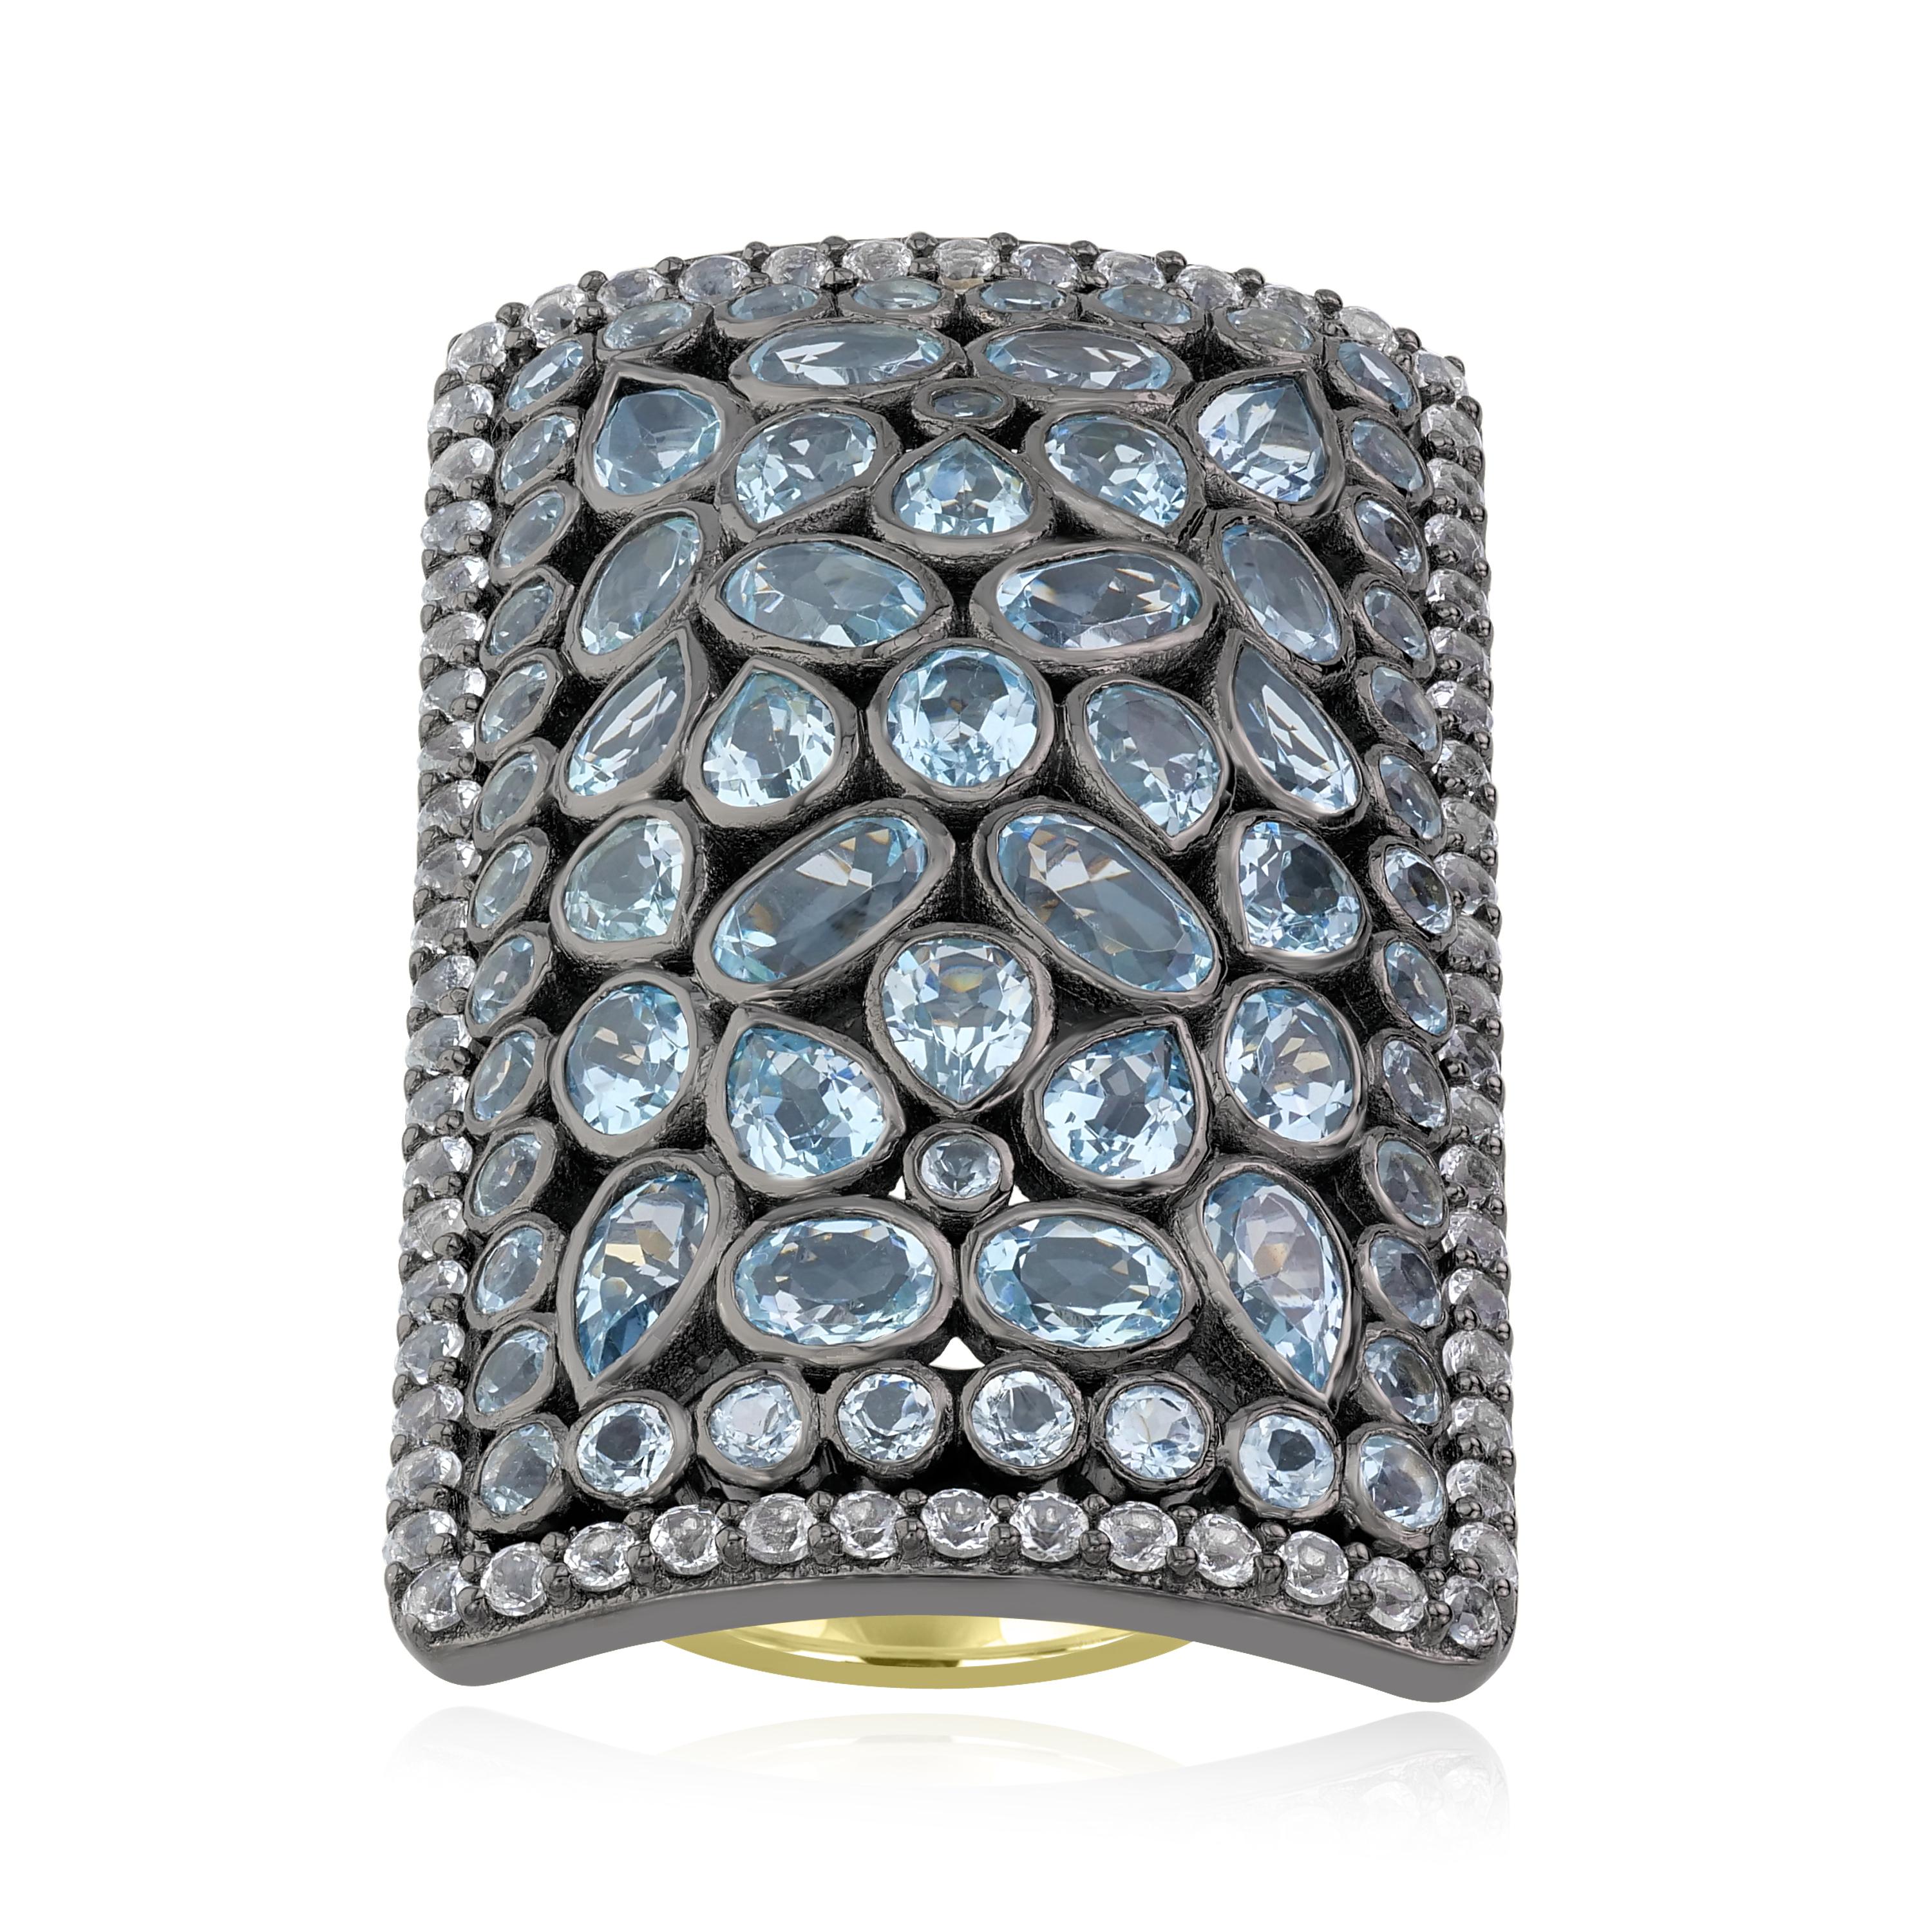 A statement ring just for your special nights. This women's ring showcases 69 sky blue topaz in varied shapes and sizes framed within 66 white natural zircon set in genuine and nickel free 925 sterling silver. This ring comes with a 14K gold